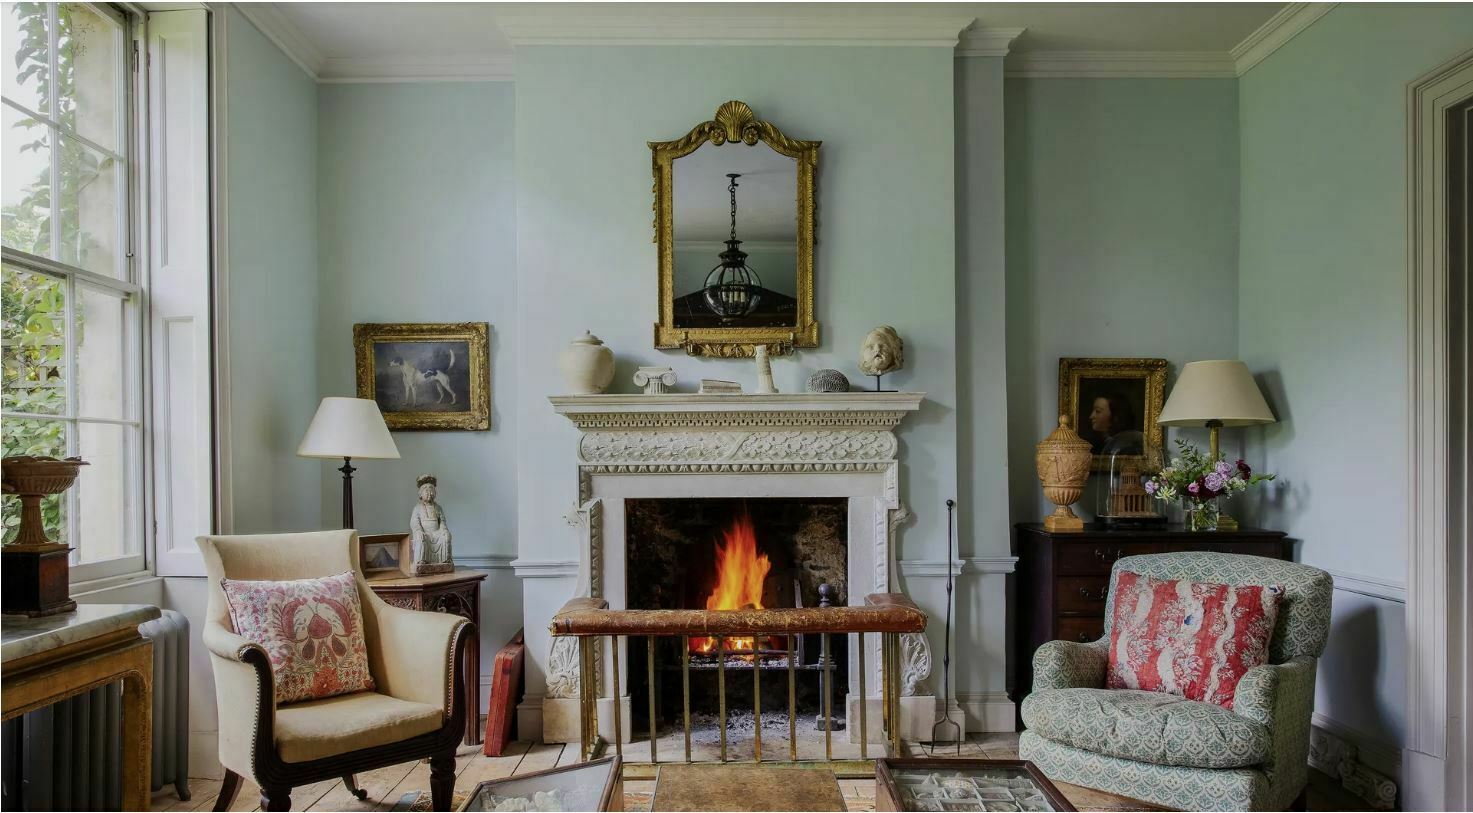 House & Garden article 'An uncompromising approach to beauty at the London house of the founders of Jamb' by Virginia Clark, photography by Owen Gale